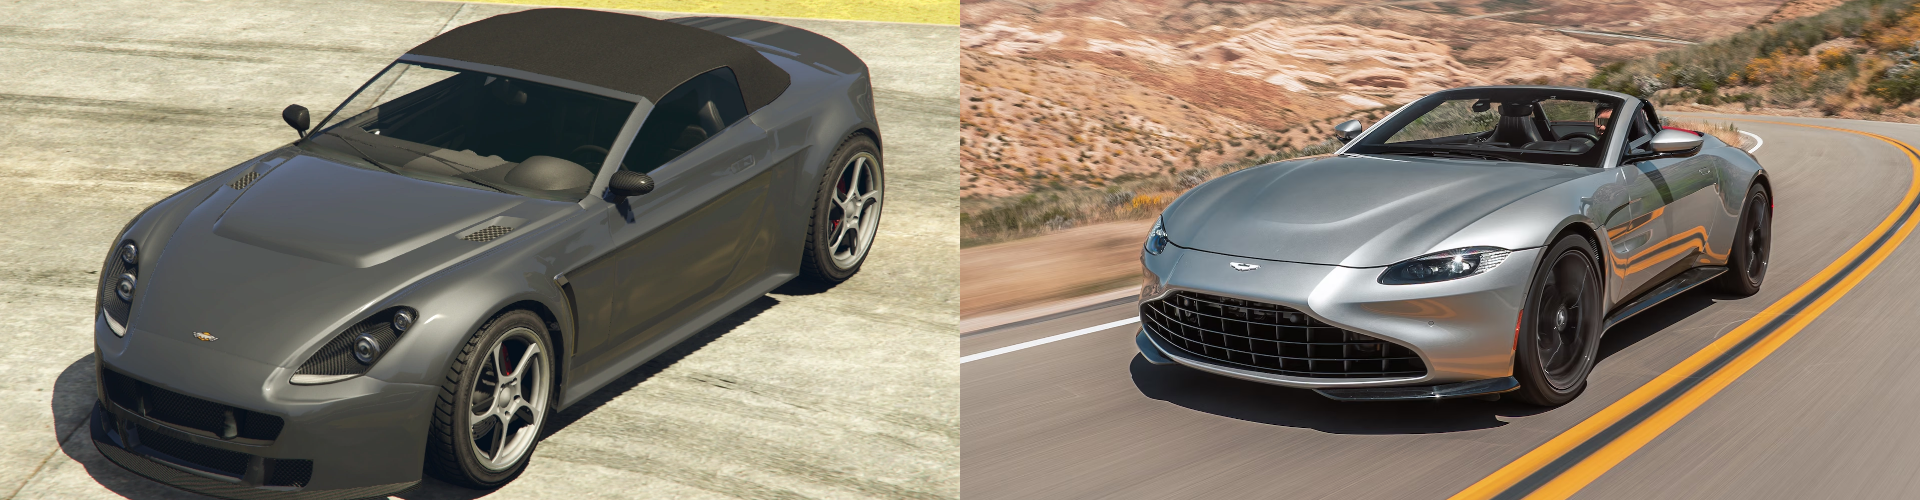 A side by side view of a virtual and real Aston Martin Vantage.